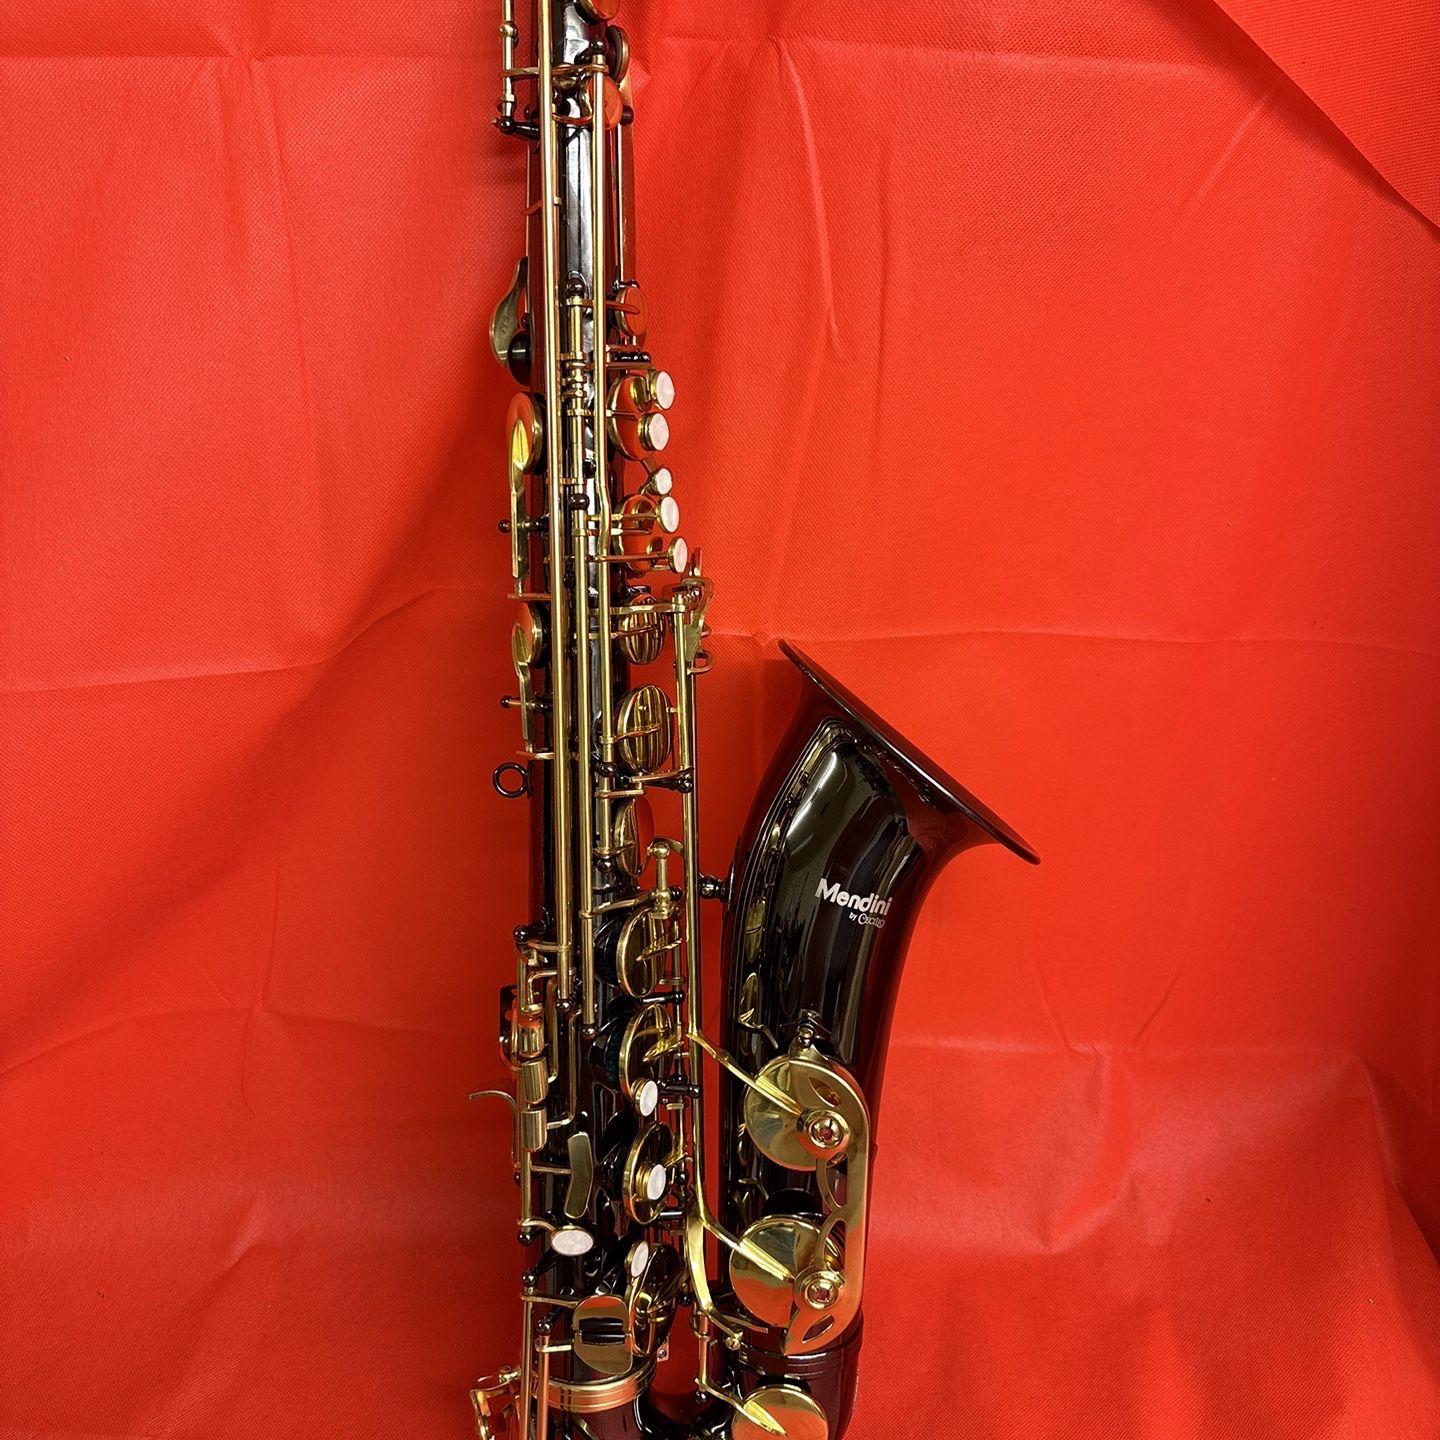 TENOR Saxophone with New Reeds Excellent Condition $550 Firm